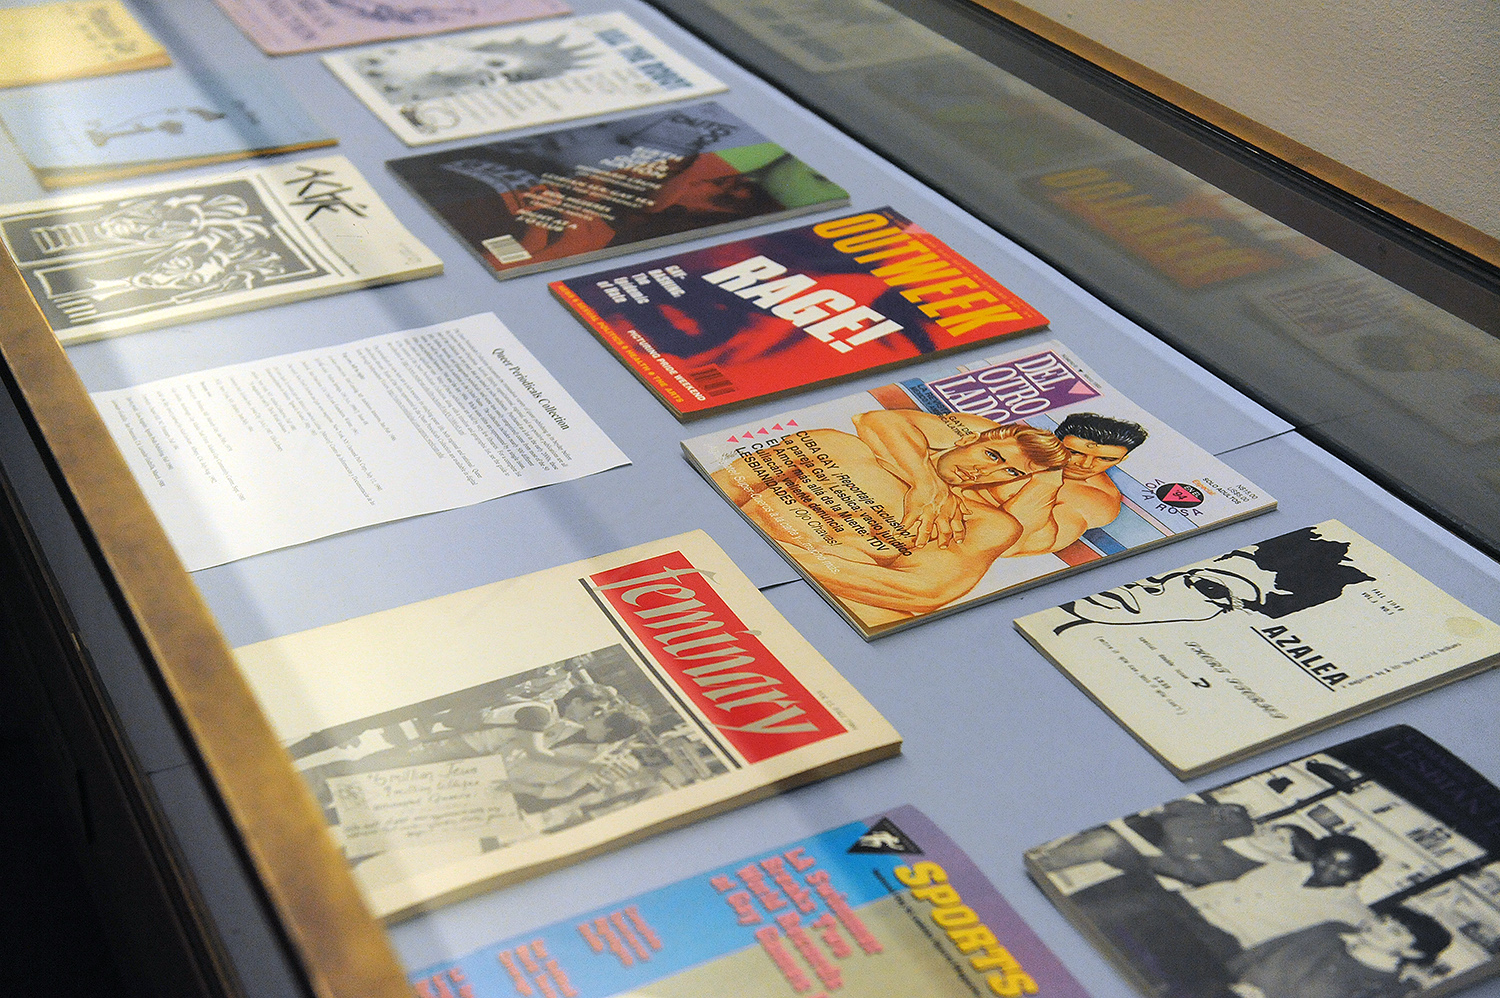 An accompanying exhibit titled "Queer Life, Queer Studies" is on display through May 15 on the first floor of Olin Library.